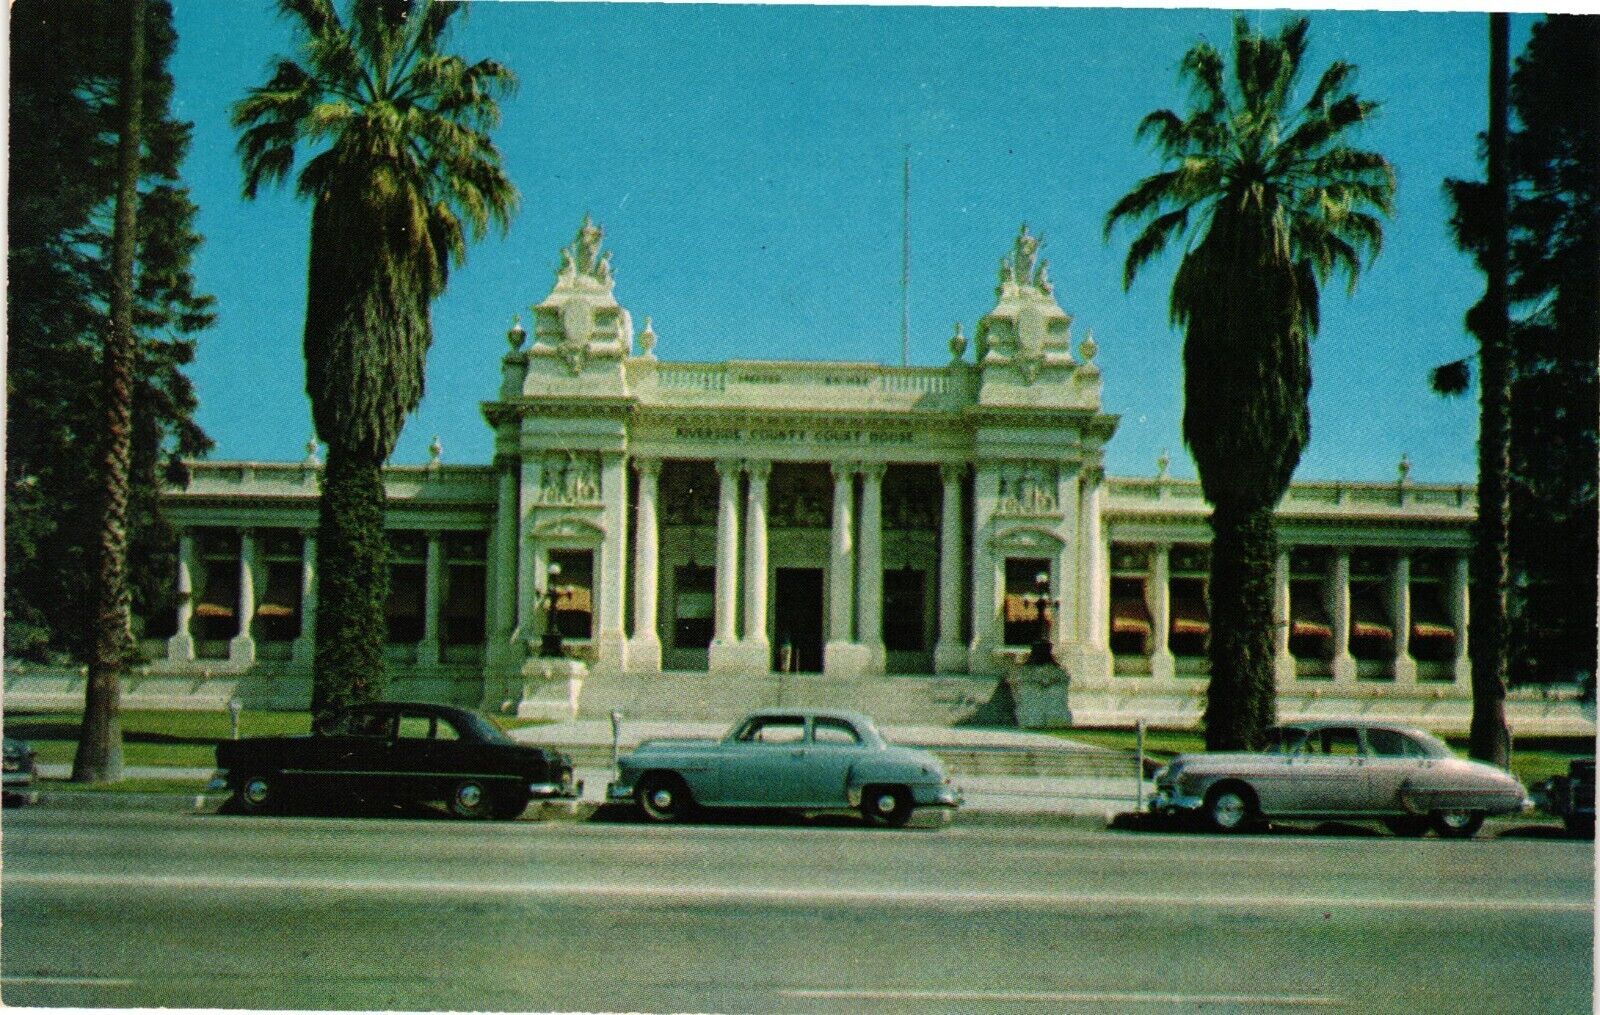 Vintage Postcard - Riverside County Courthouse California C1960 Street View